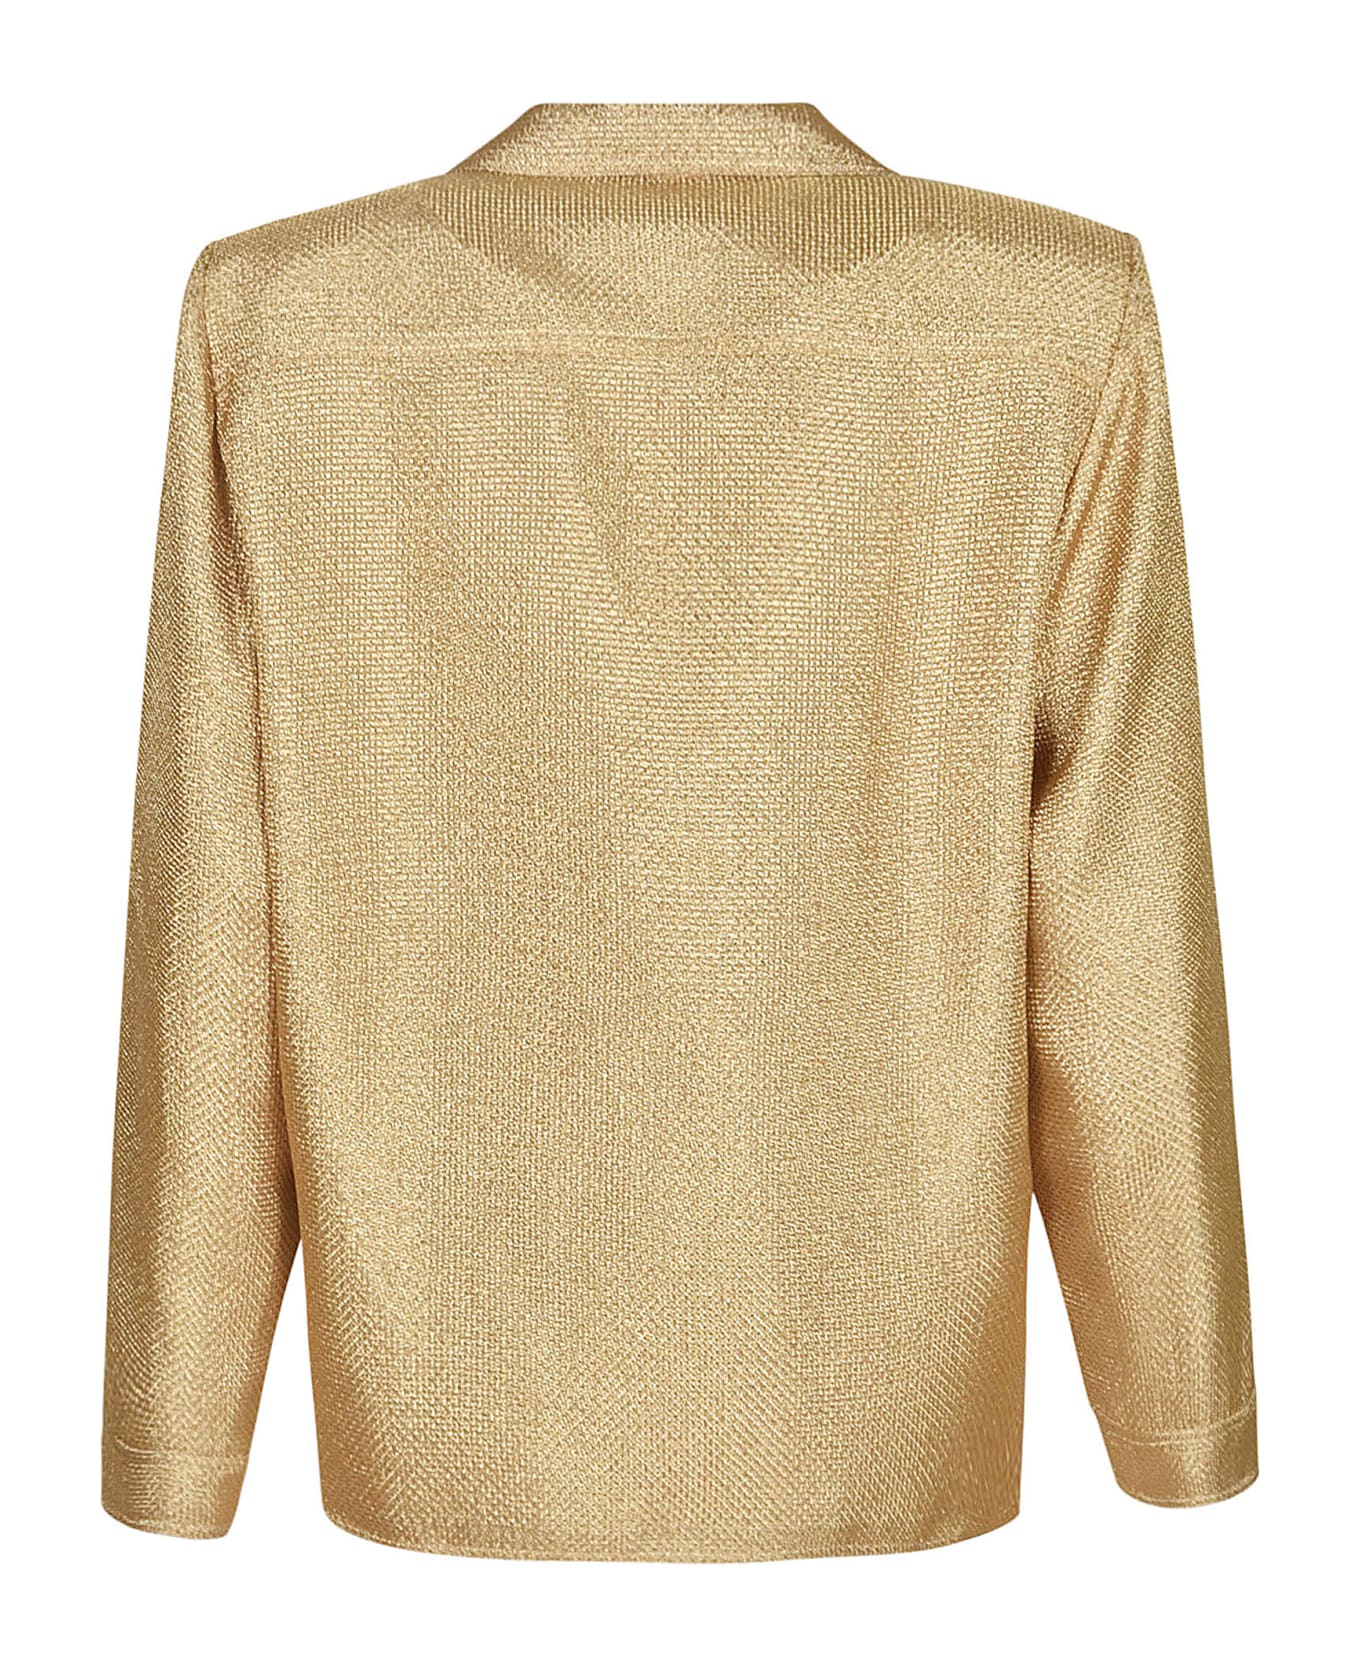 Blazé Milano Double-breasted Fitted Blazer - Gold